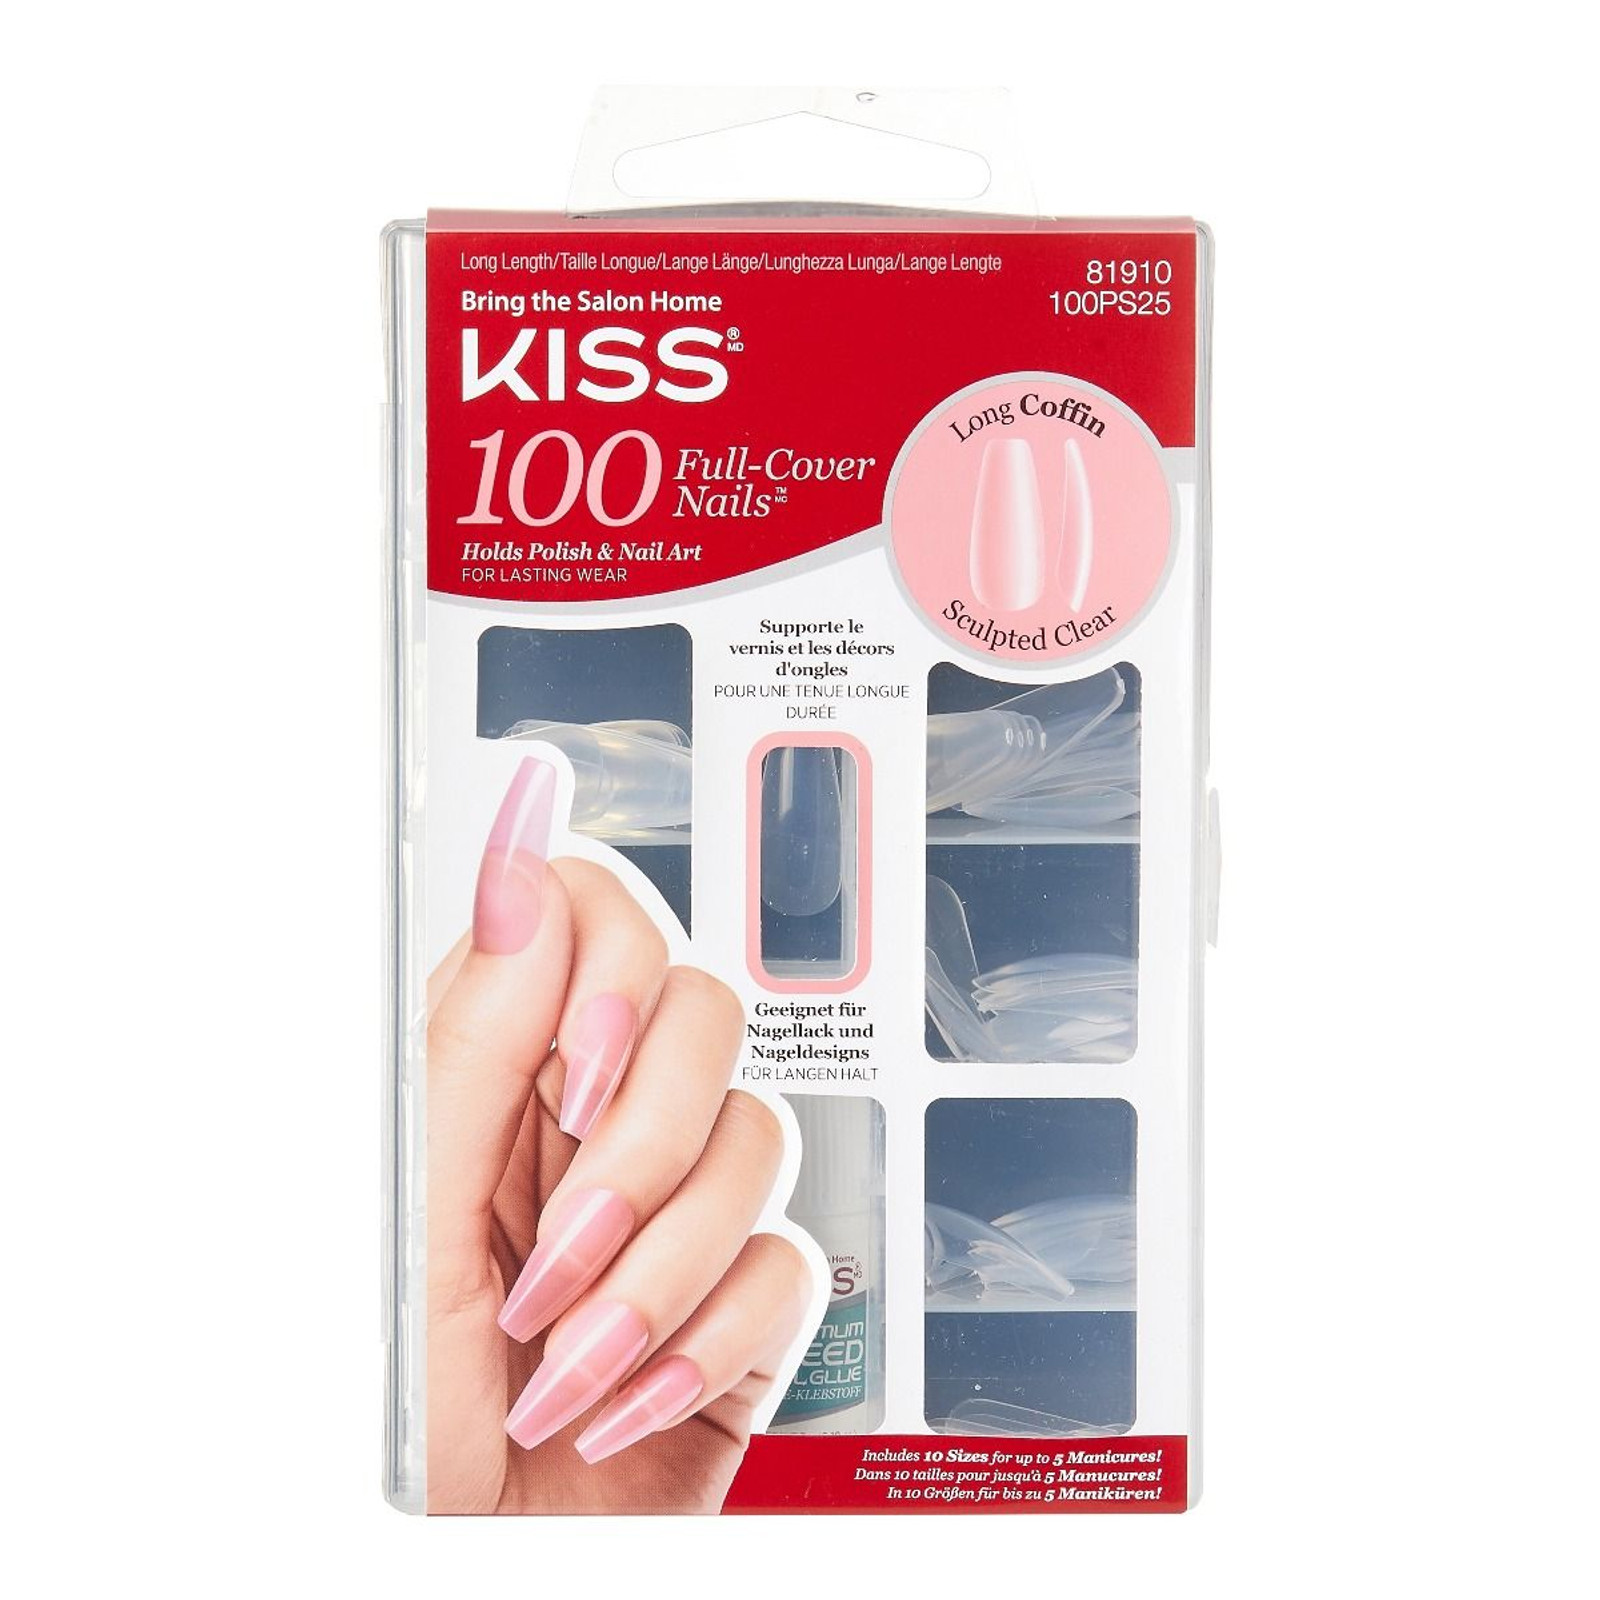 Kiss* 100pc Full Cover Nails Holds Polish Nail Art Coffin 10 Sizes Long  #71167 for sale online | eBay